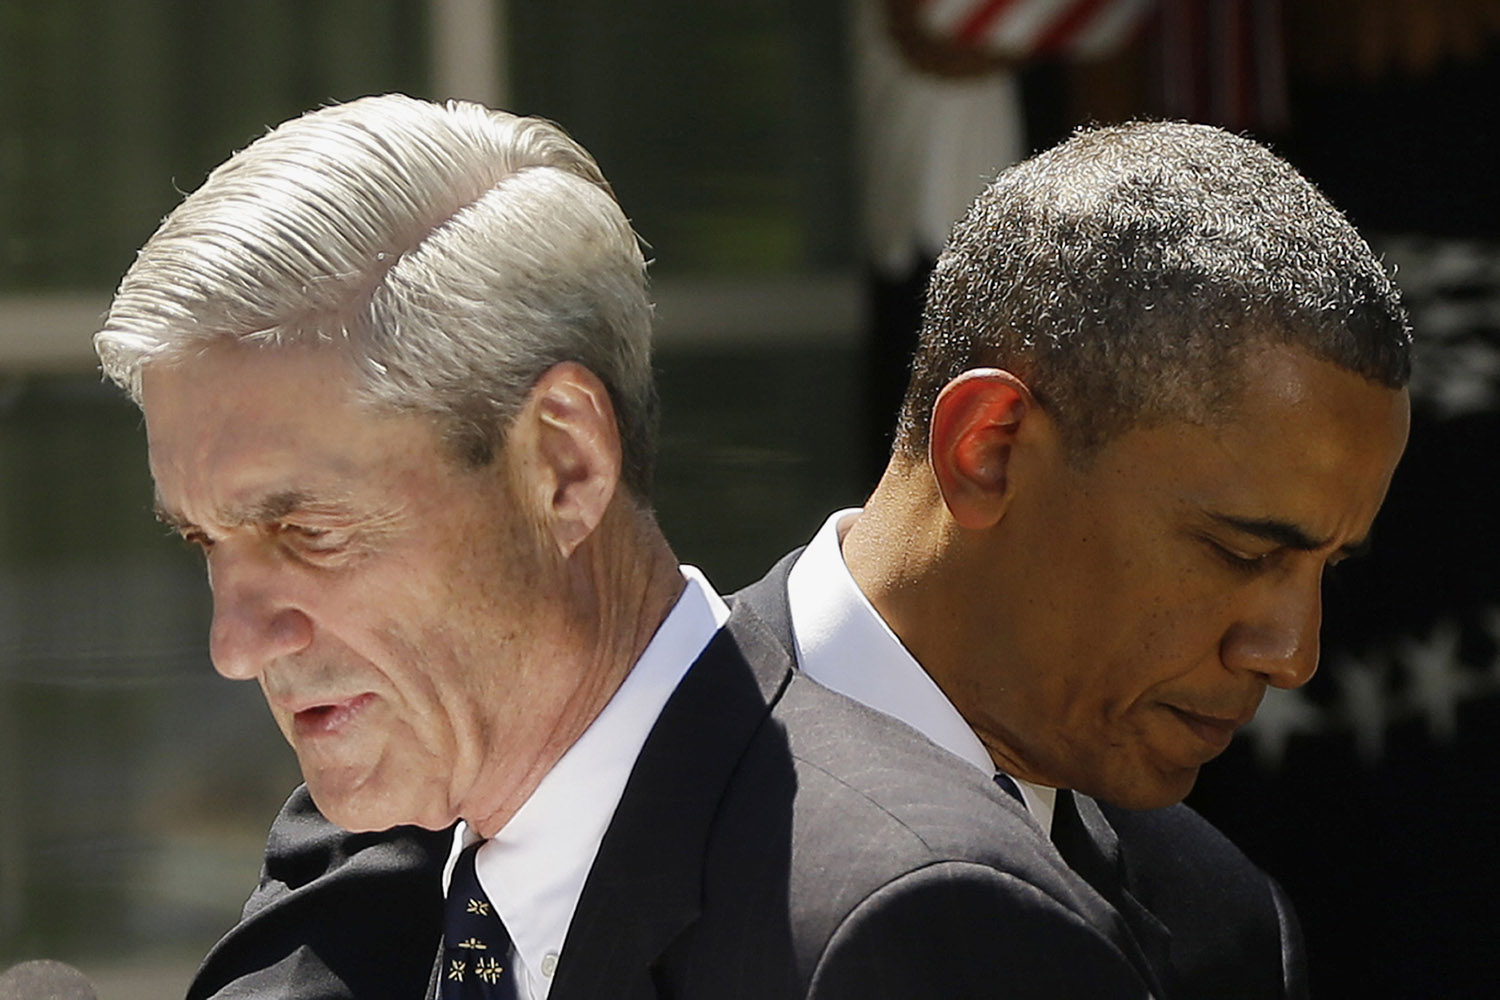 June 21, 2013. President Barack Obama and outgoing FBI Director Robert Mueller are seen  in the Rose Garden of the White House in Washington, where the president announced he would nominate James Comey, a senior Justice Department official under President George W. Bush, to replace Mueller, as FBI director.